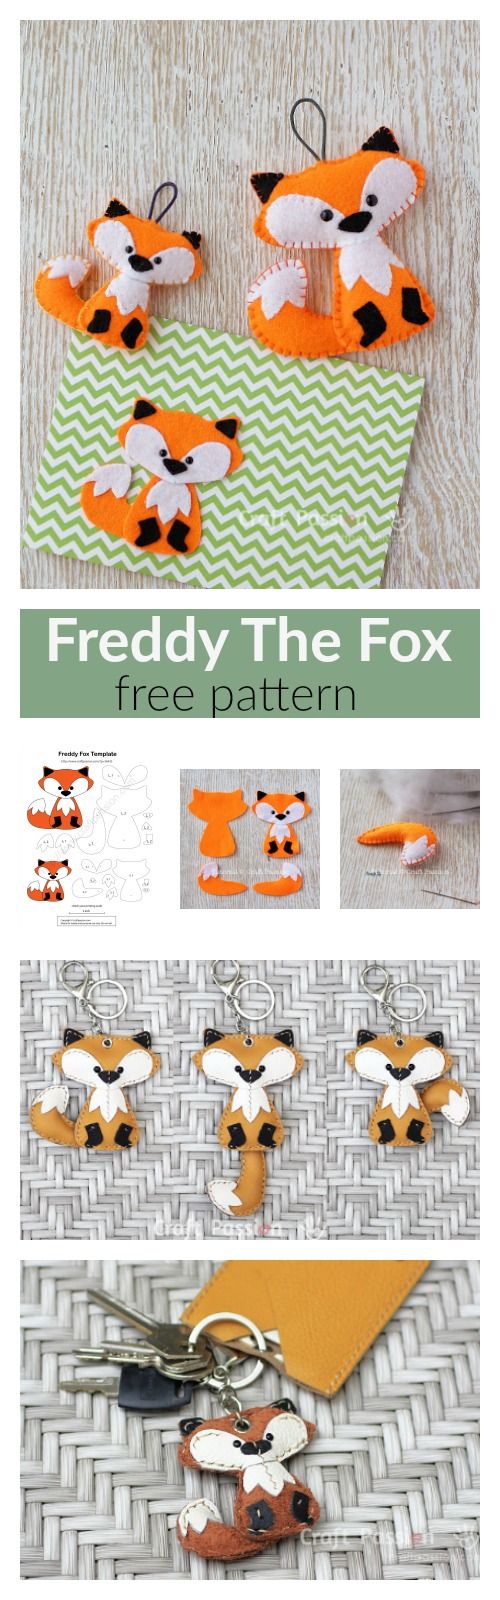 fox pattern freddy free pattern tutorial felting foxes and small